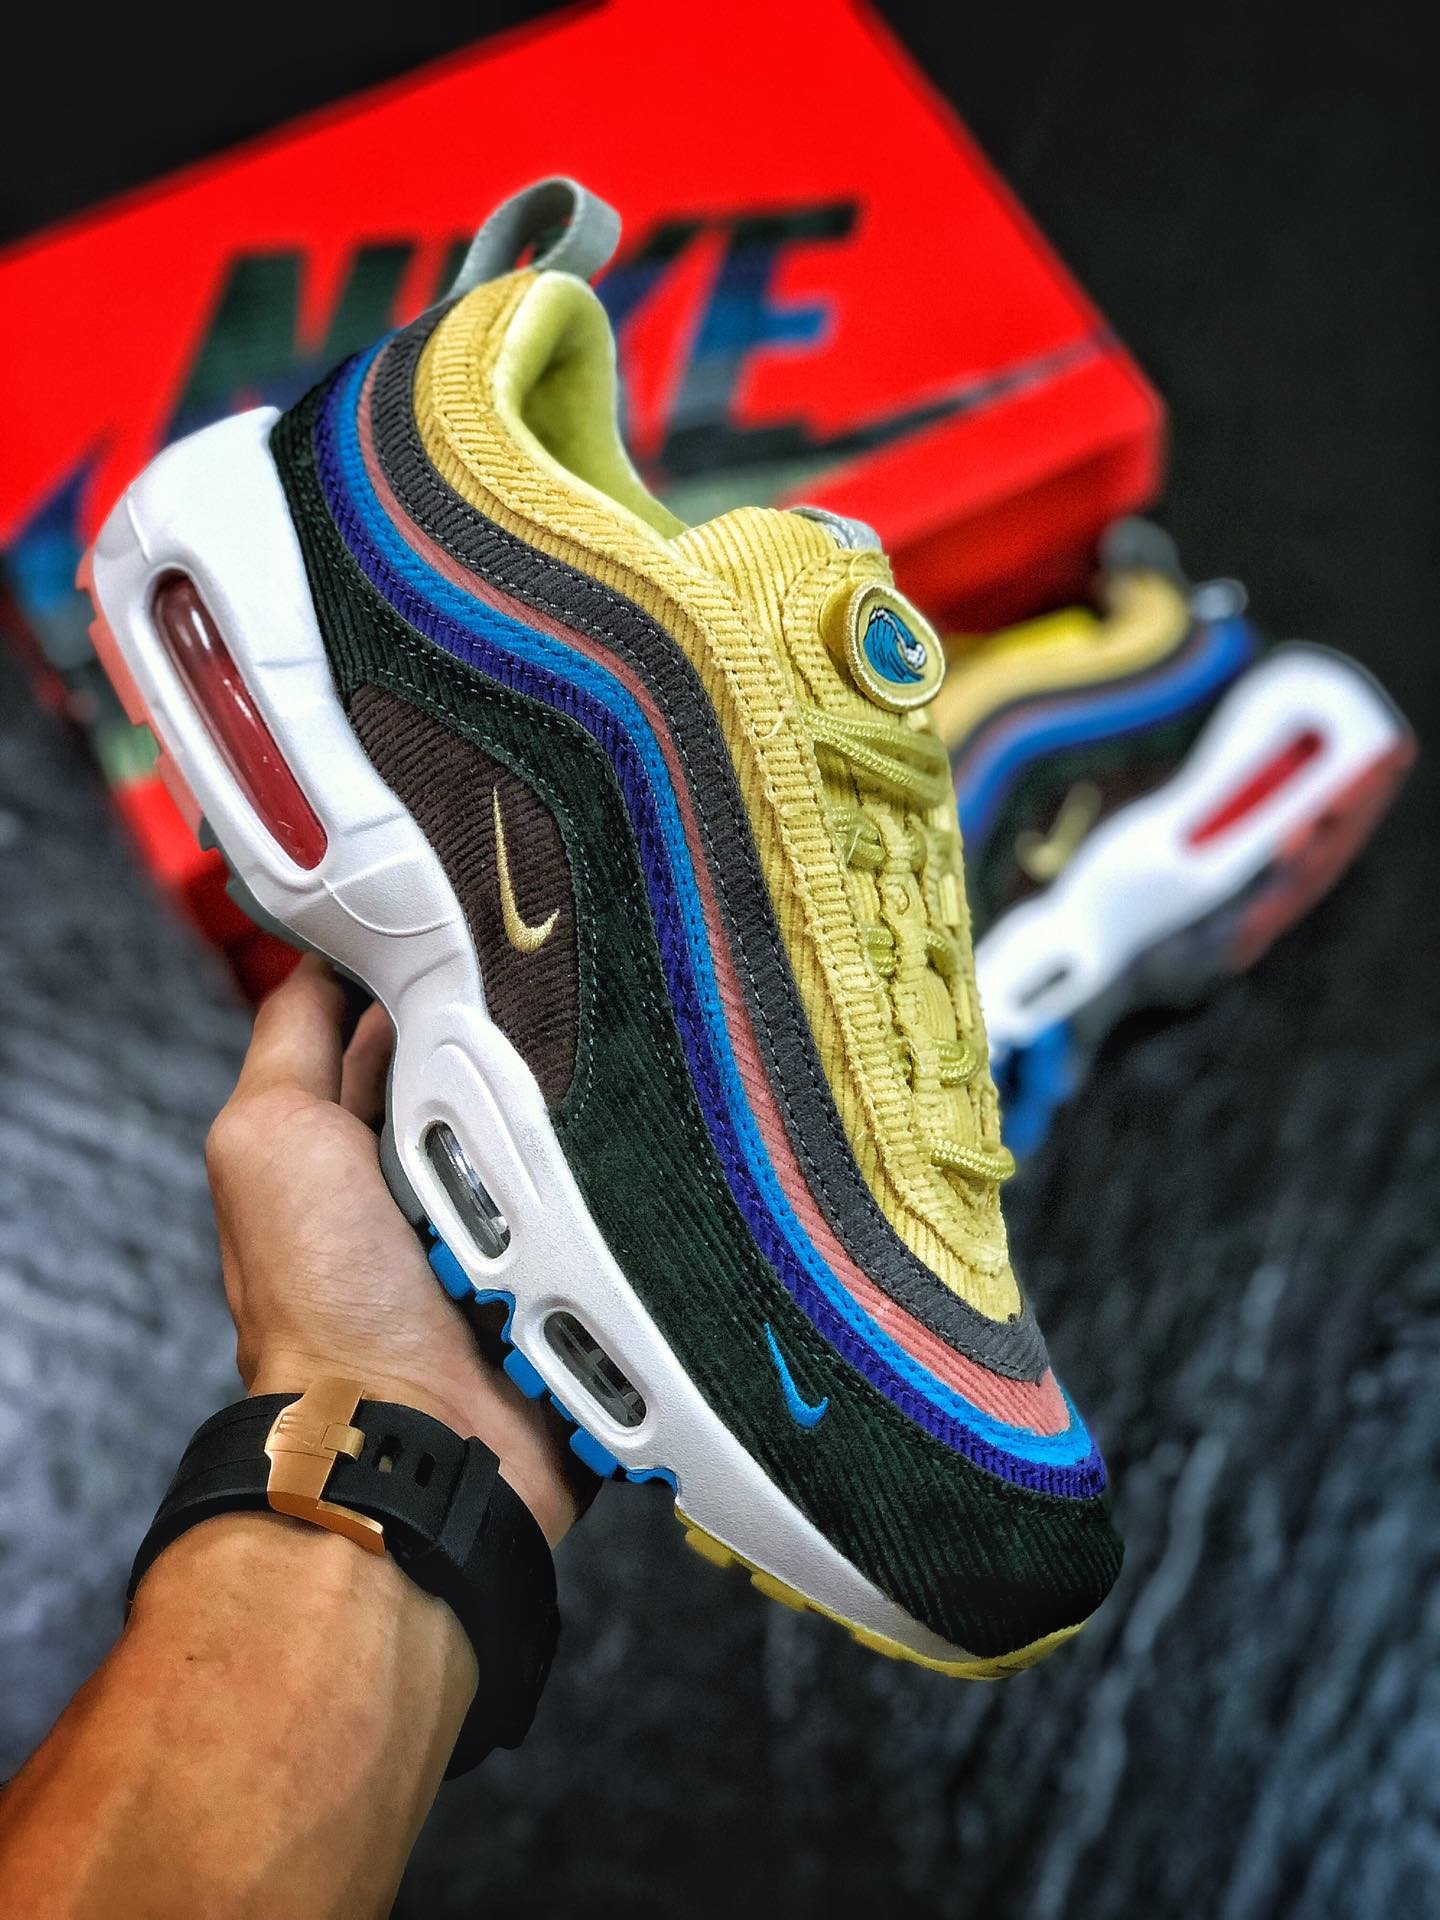 wotherspoon 95